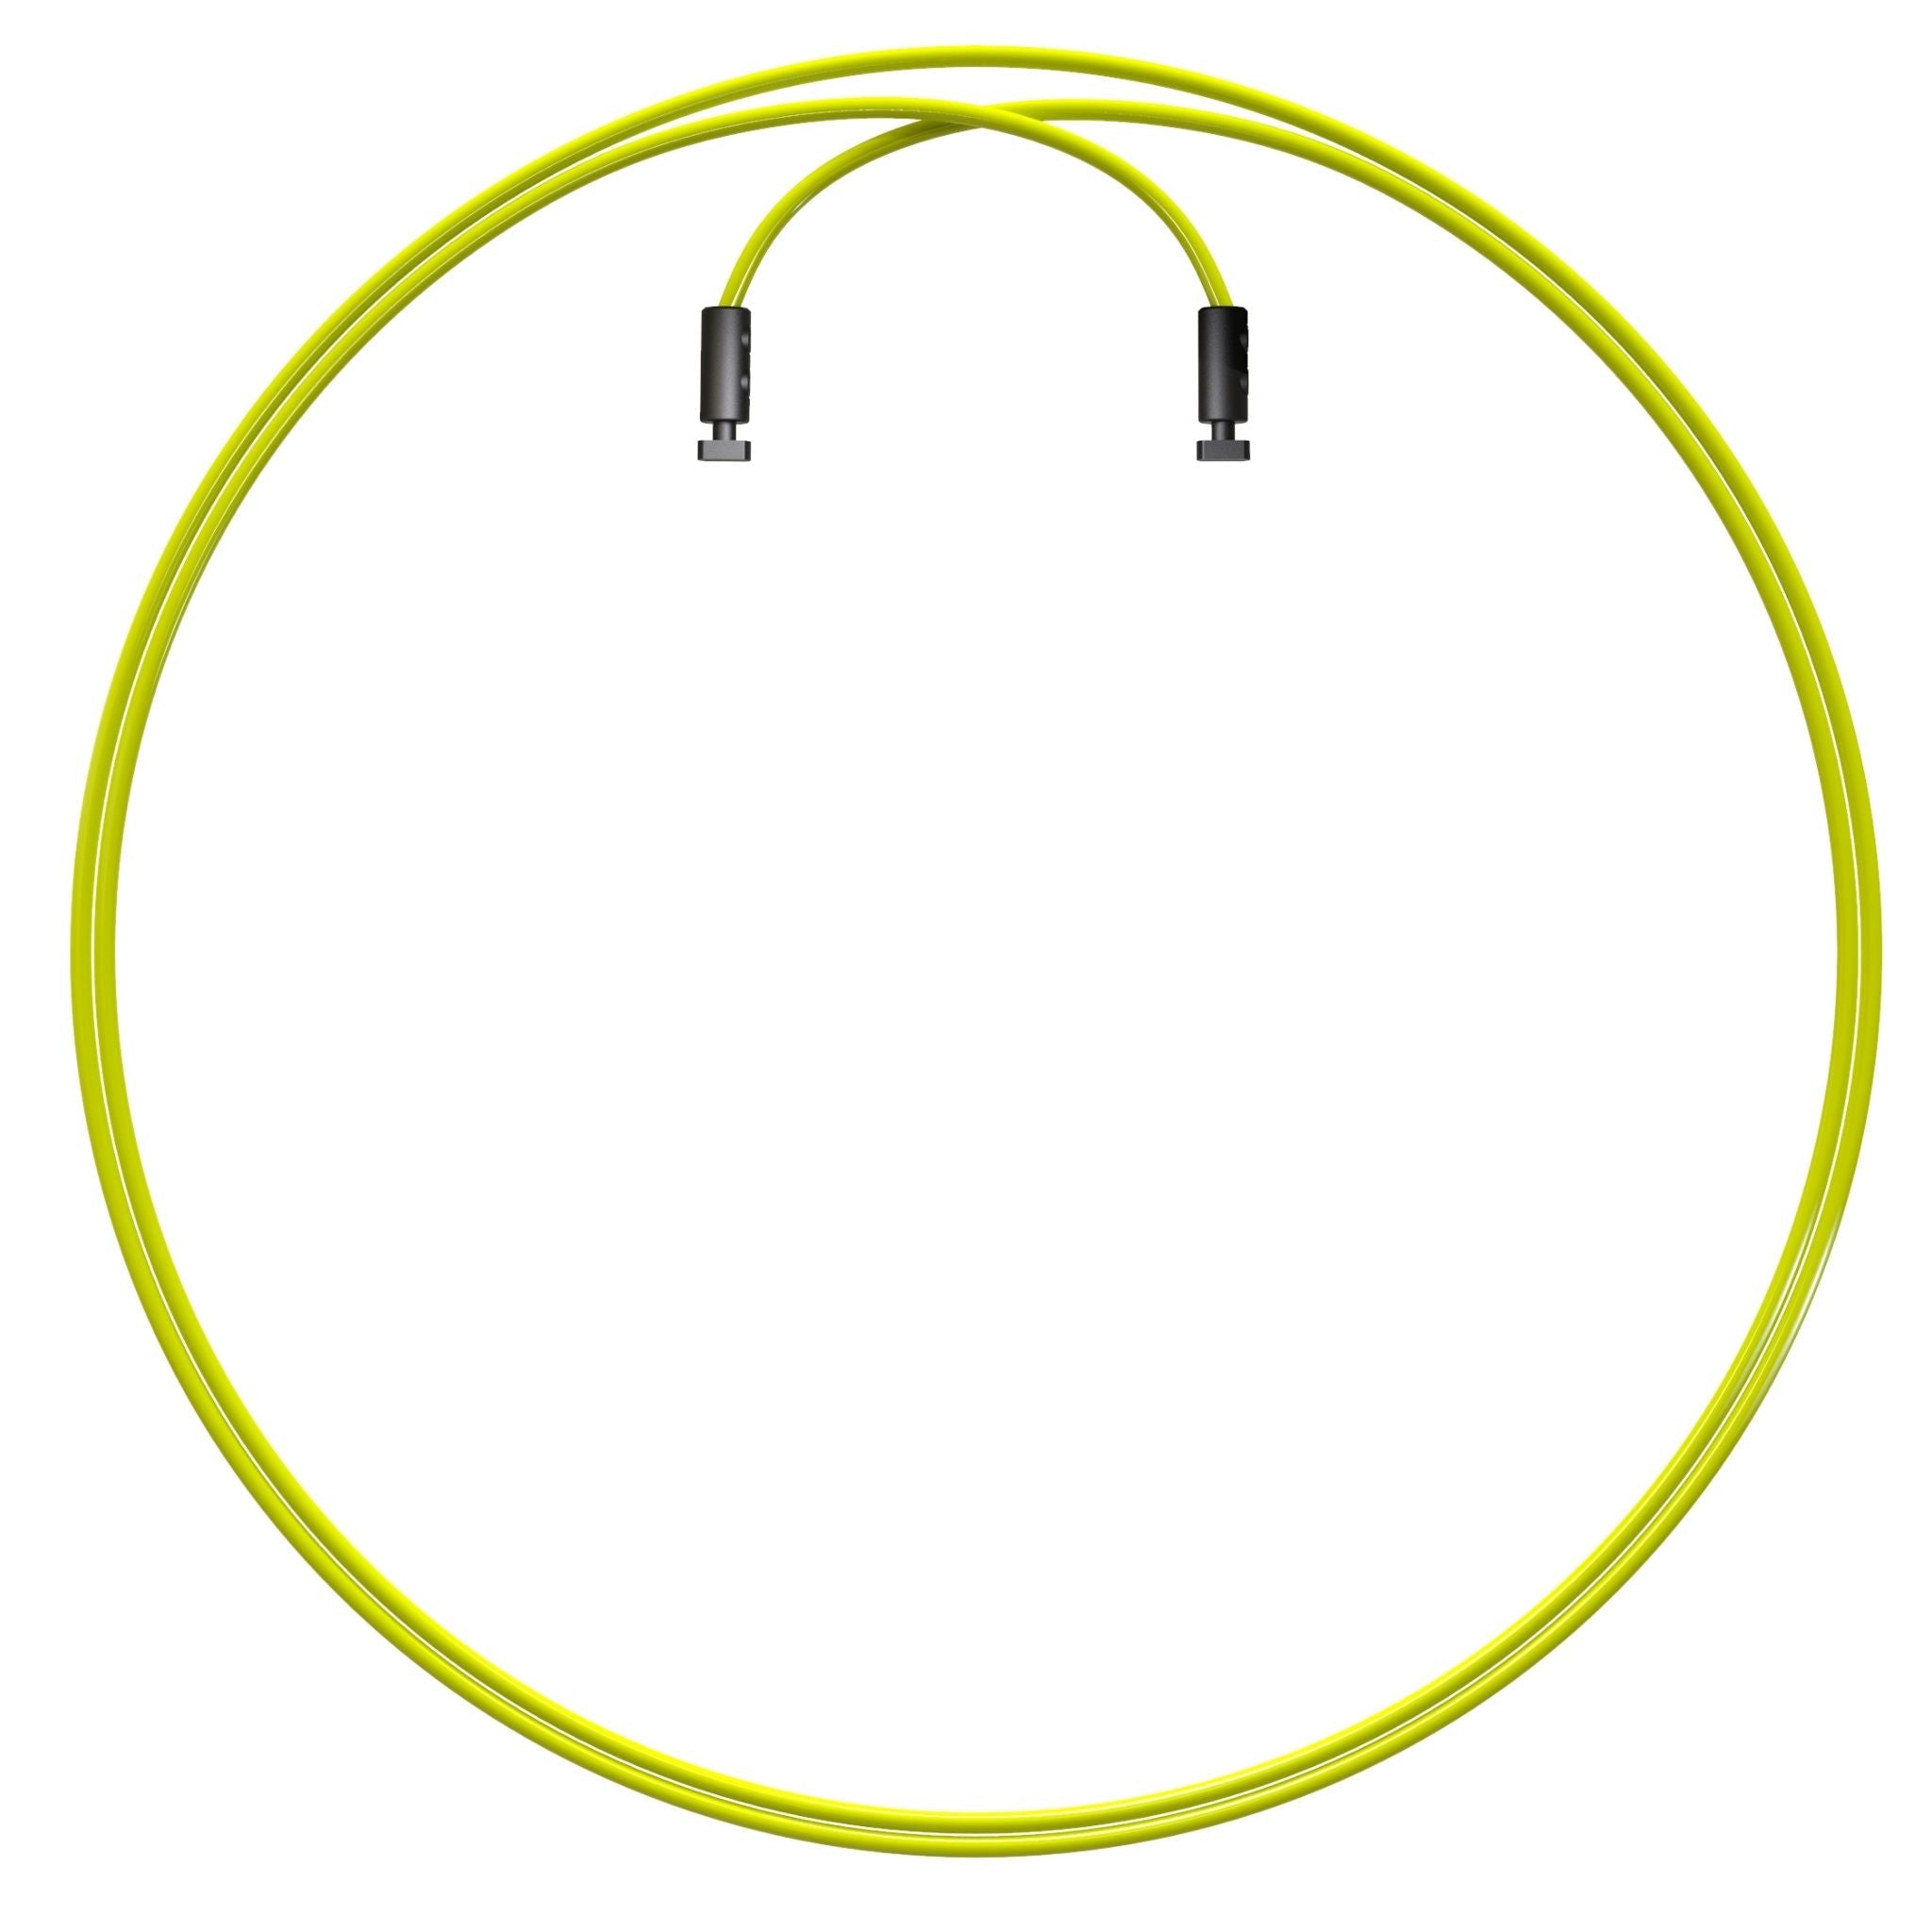 Cable 4 Mm Para Earth 2.0 Velites - verde - 